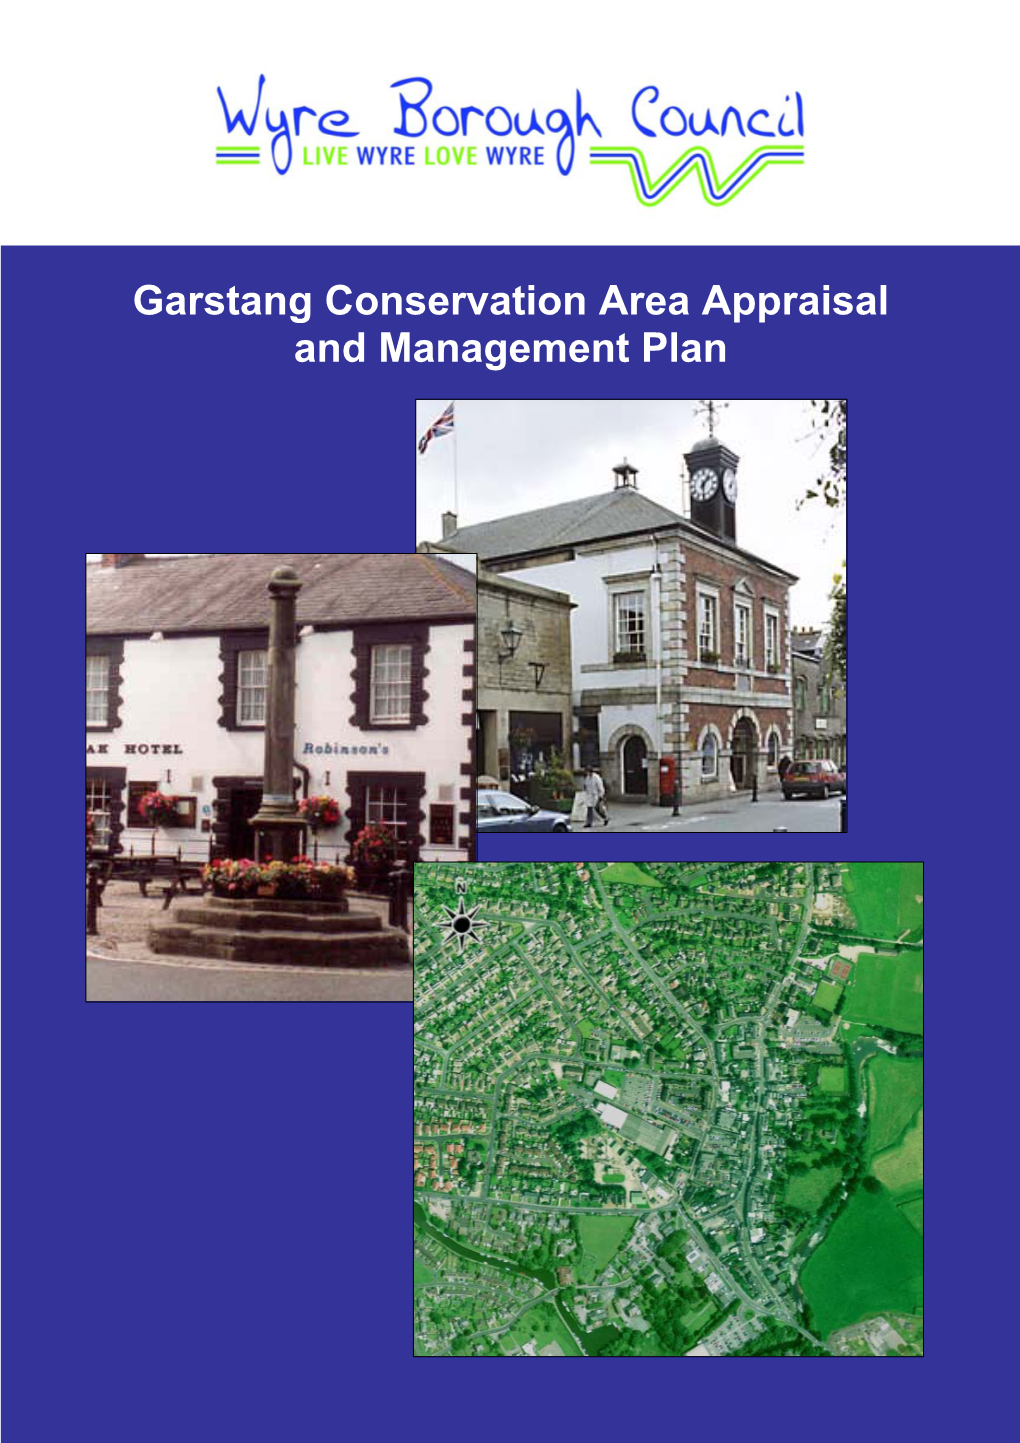 Garstang Conservation Area Appraisal and Management Plan